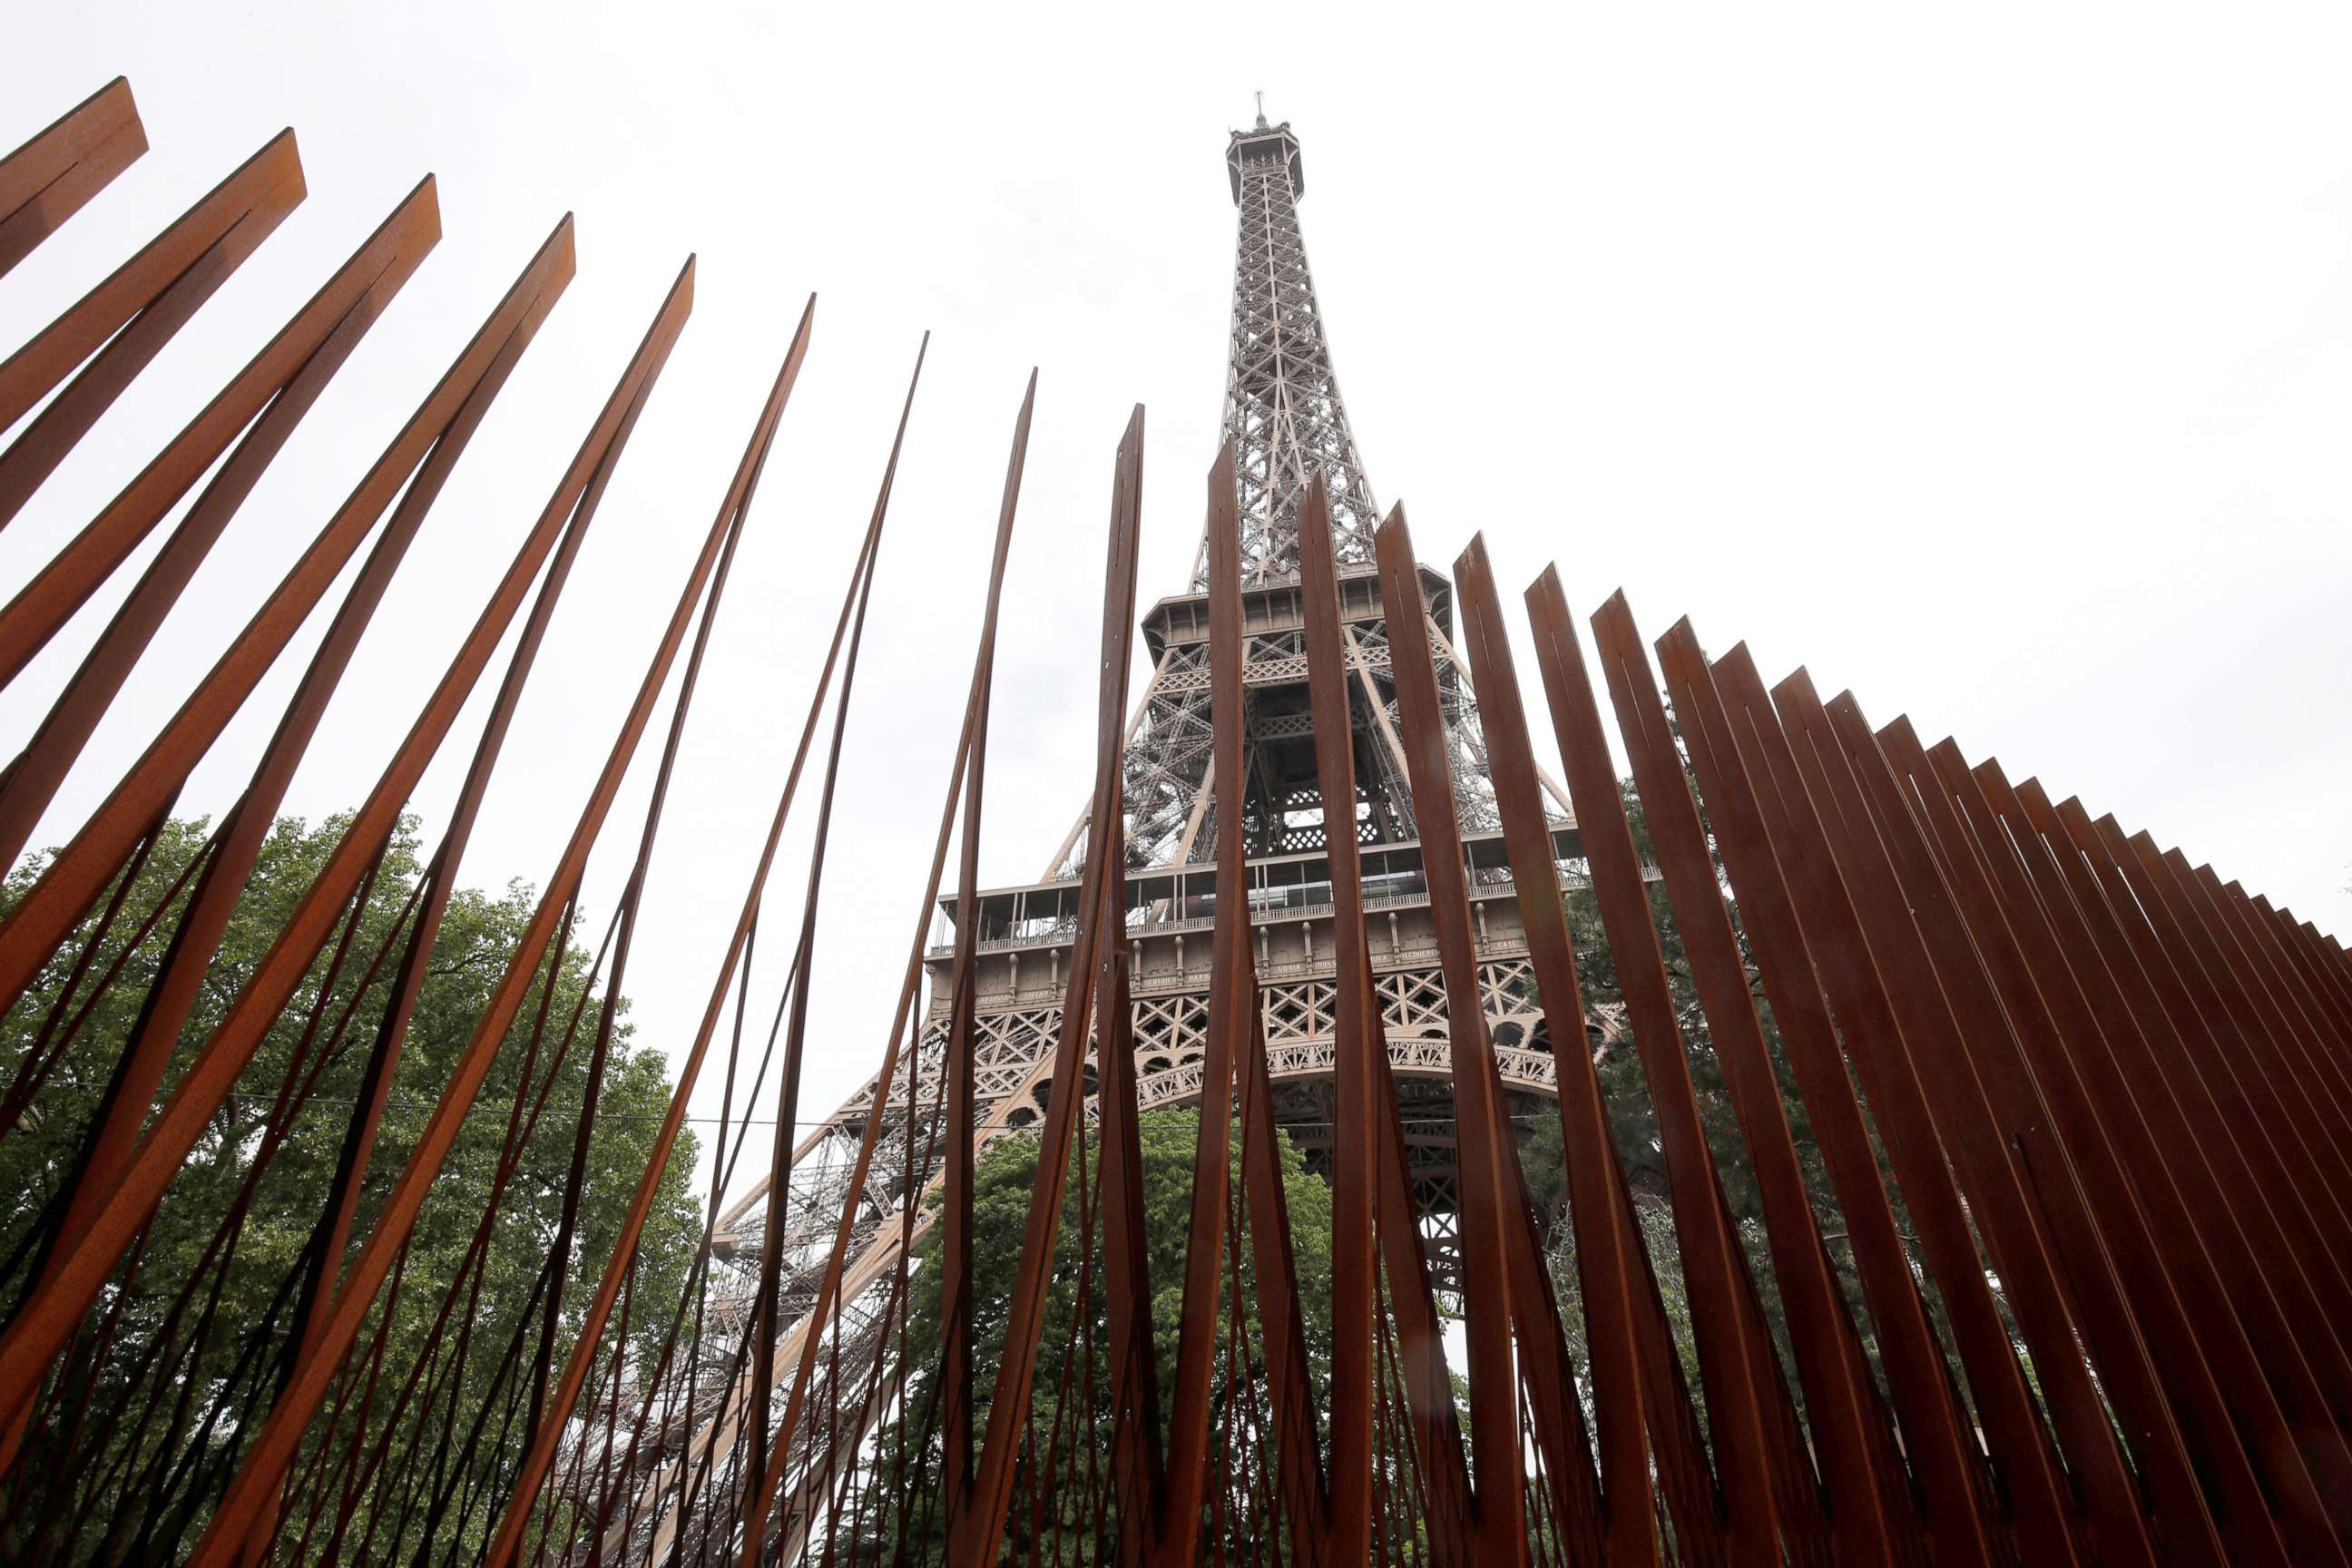 PHOTO: A security steel fence is pictured around the Eiffel Tower in Paris, June 14, 2018.